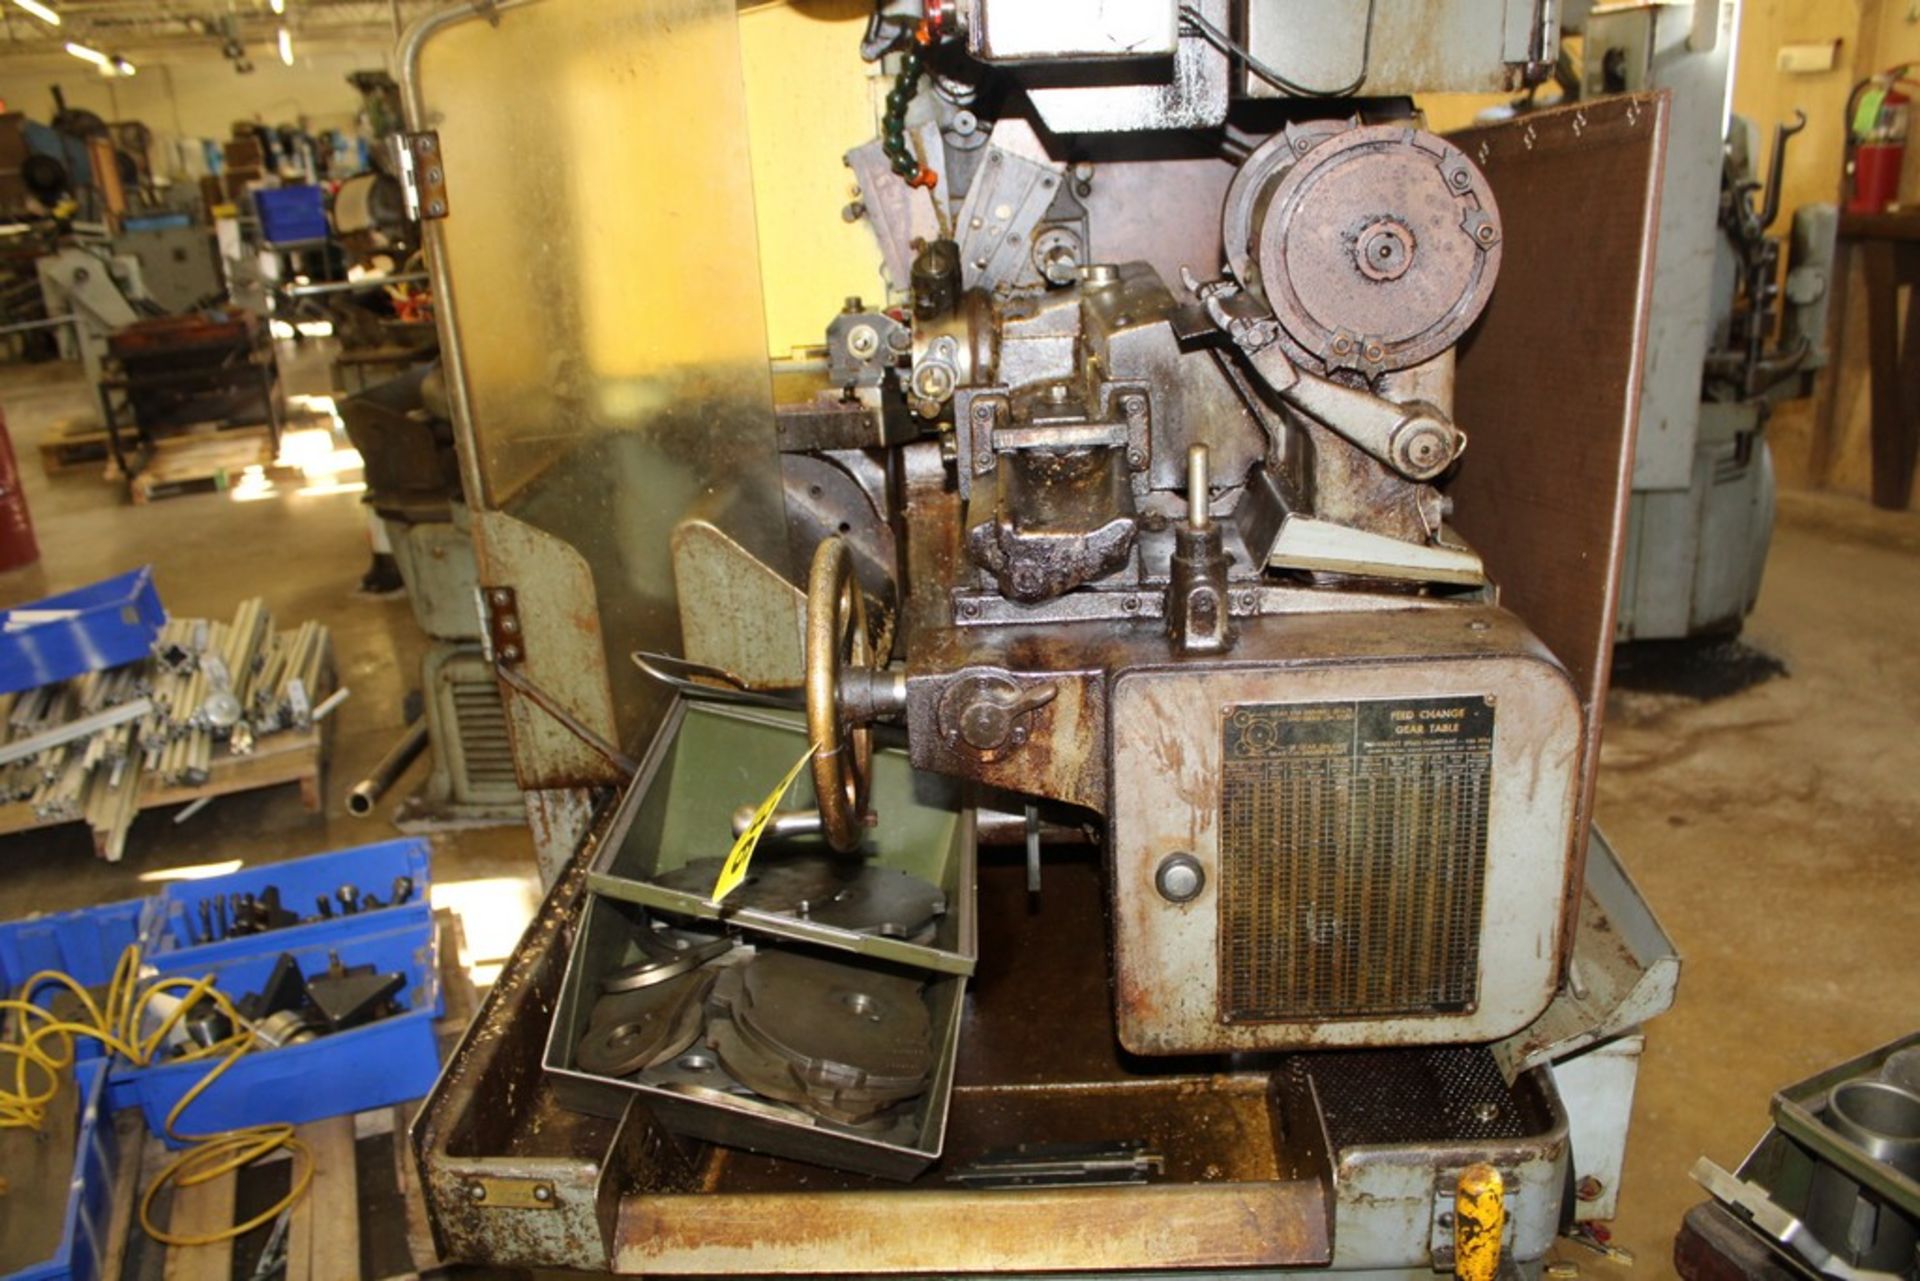 BROWN & SHARPE NO. 2 1-5/8" 4-SPEED AUTOMATIC SCREW MACHINE, S/N 542-2-6217, WITH VERTICAL SLIDE - Image 3 of 6